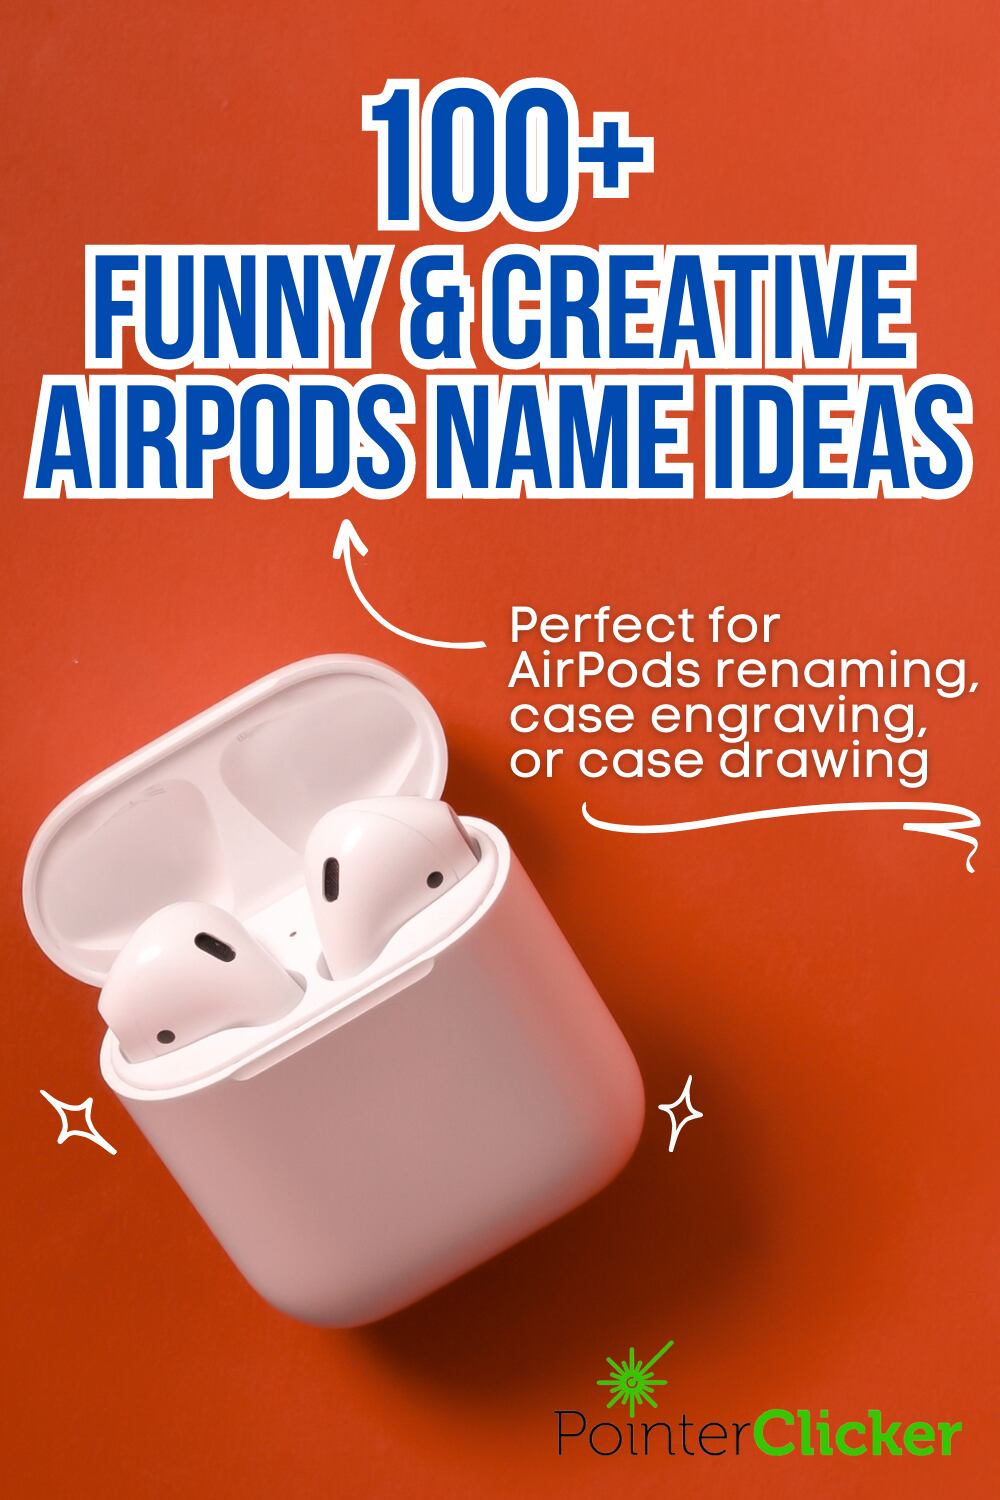 100+ funny and creative airpods name ideas perfect for airpods renaming, case engraving or case drawing